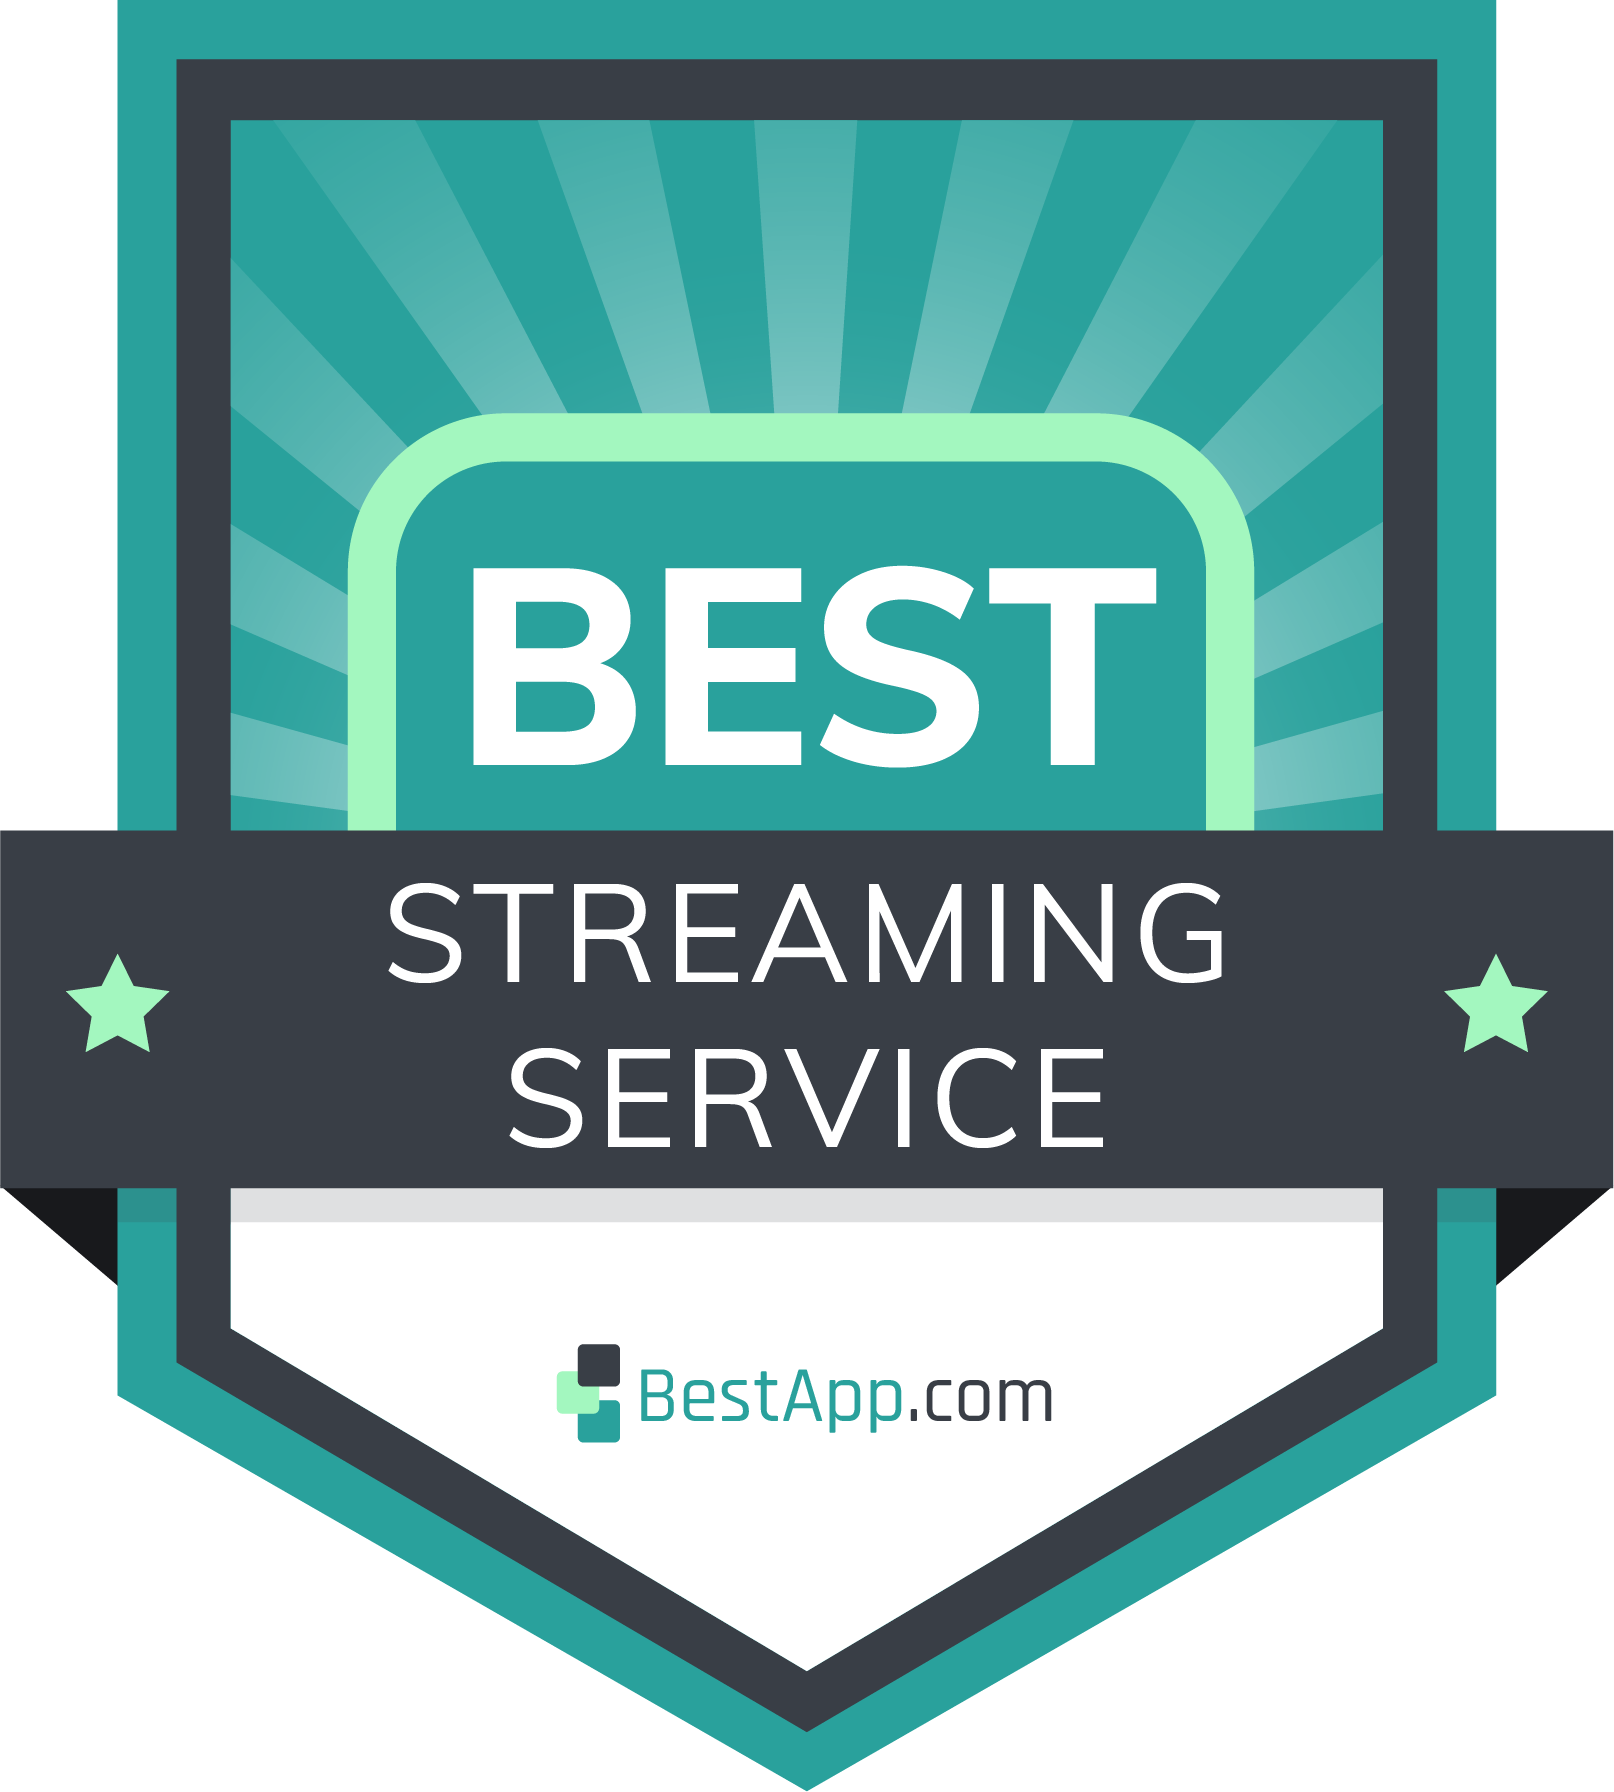 best streaming service badge